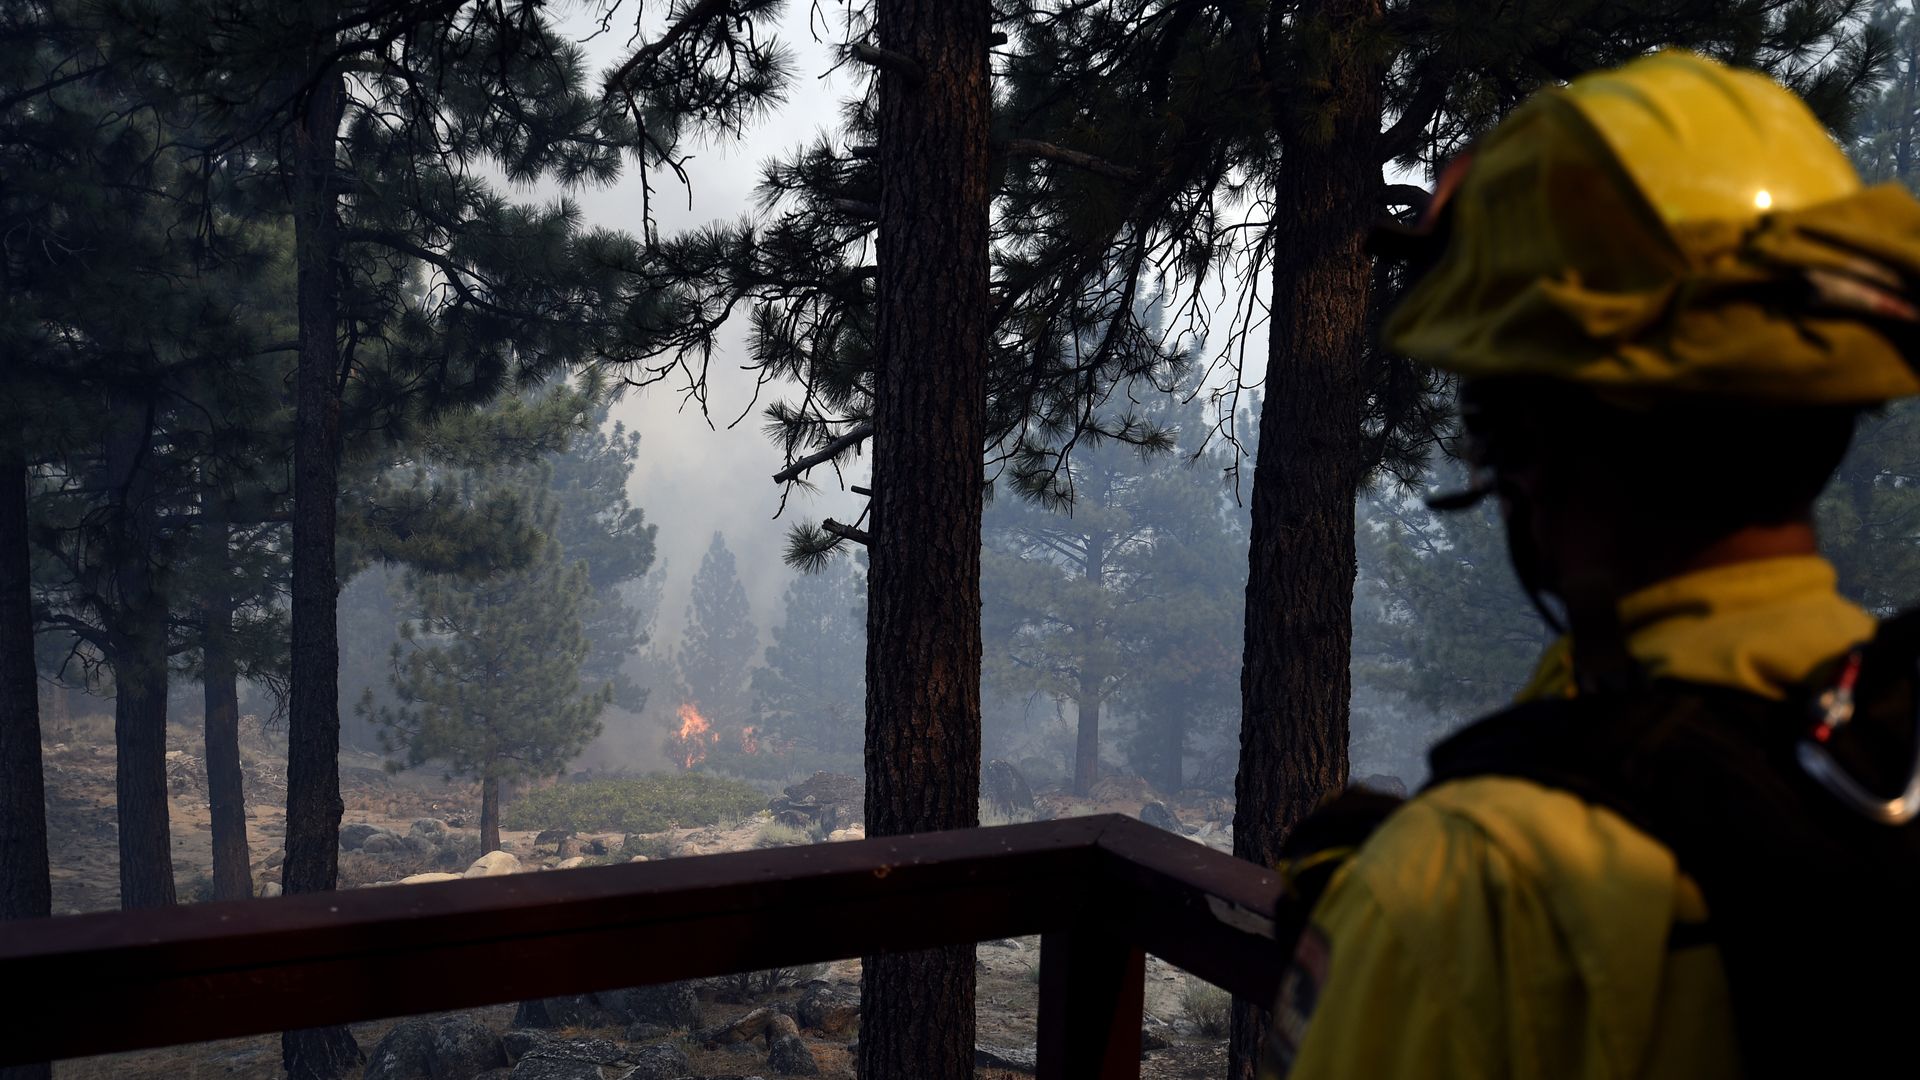 Firefighters take measures at the site as fire continues in Doyle, California, United States on July 12